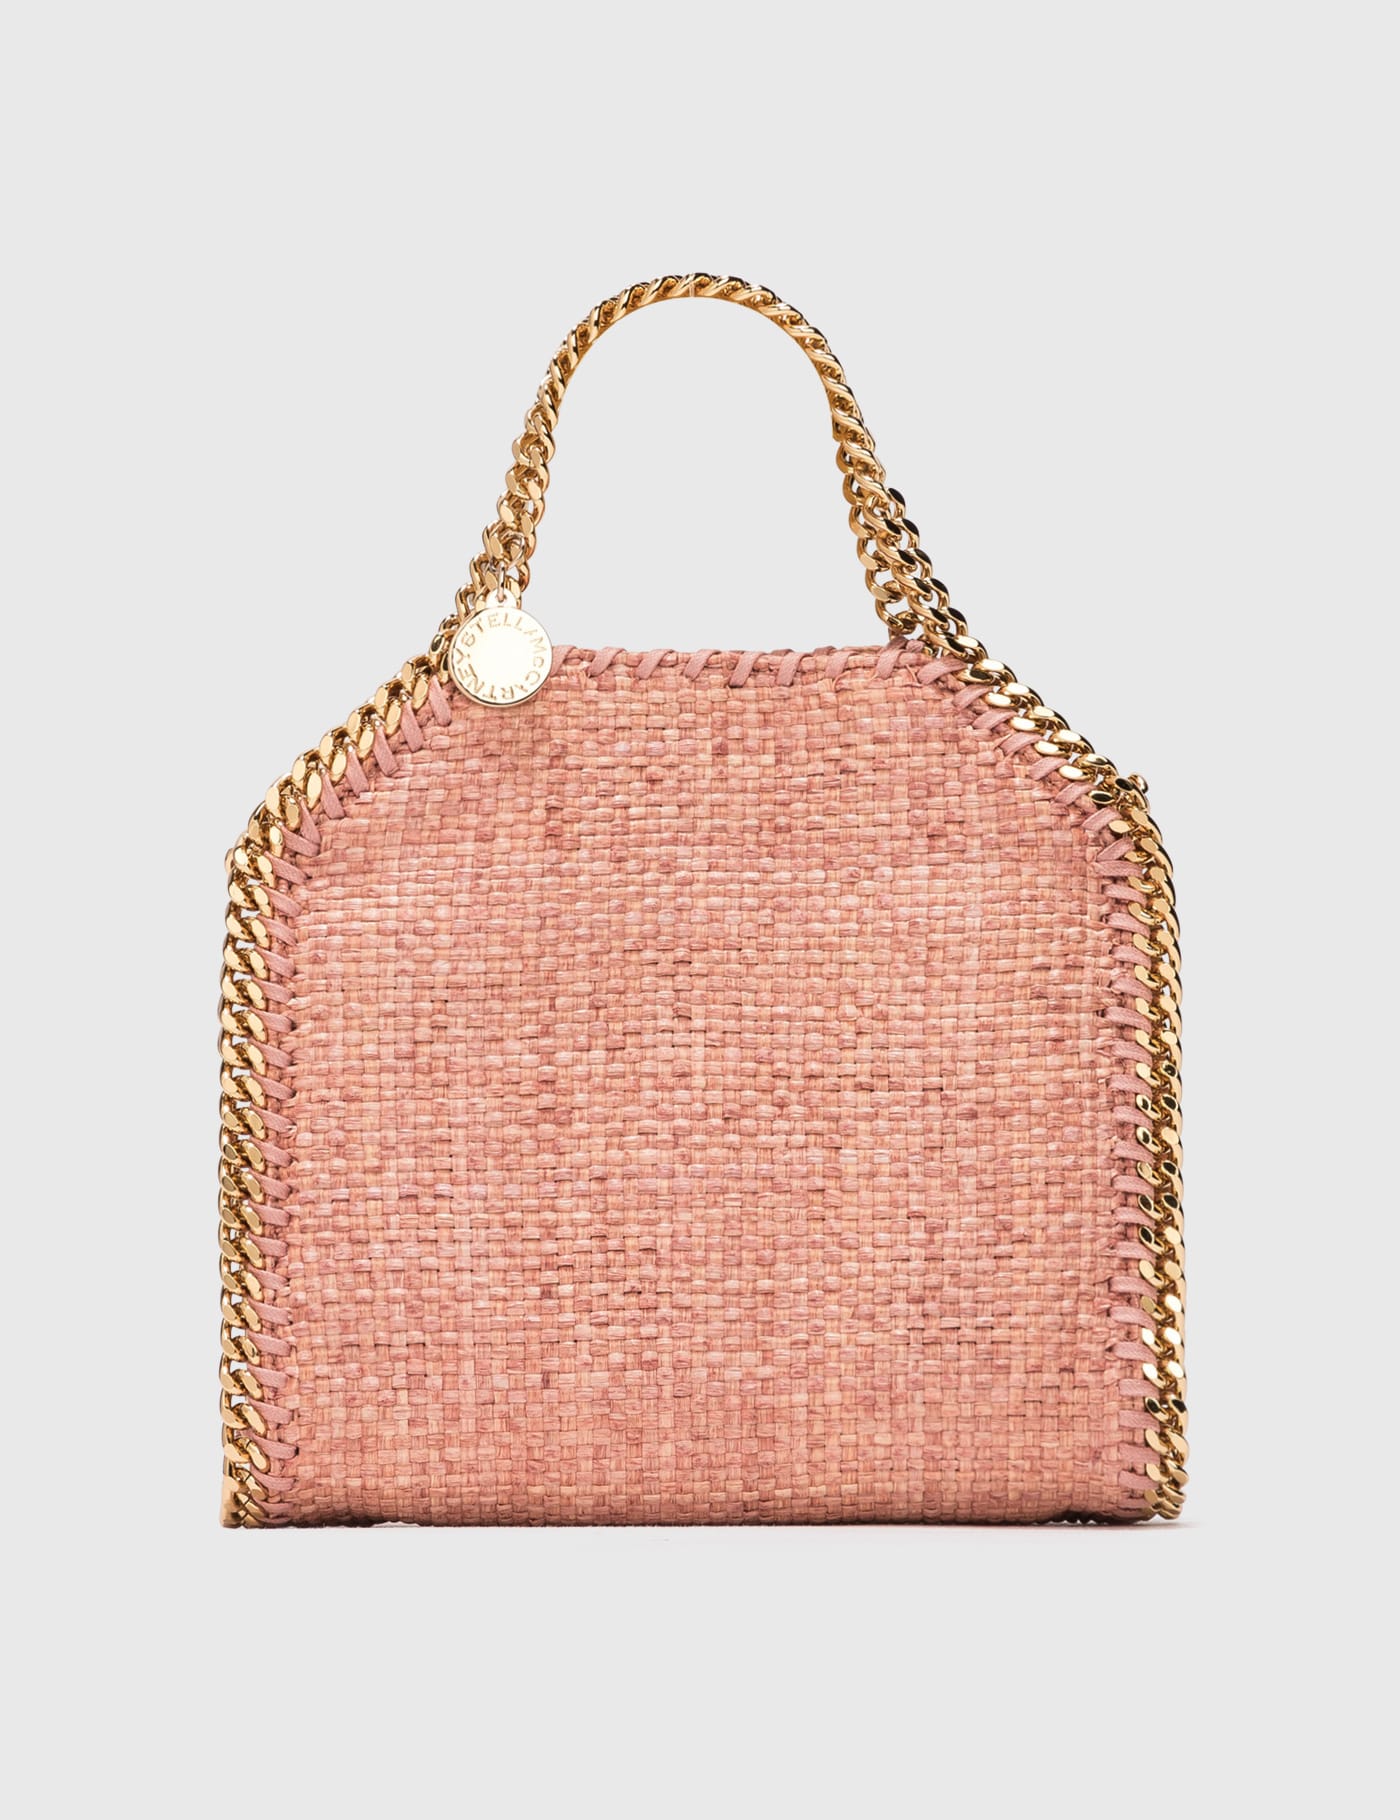 JW Anderson - Nano Cap Bag | HBX - Globally Curated Fashion and 